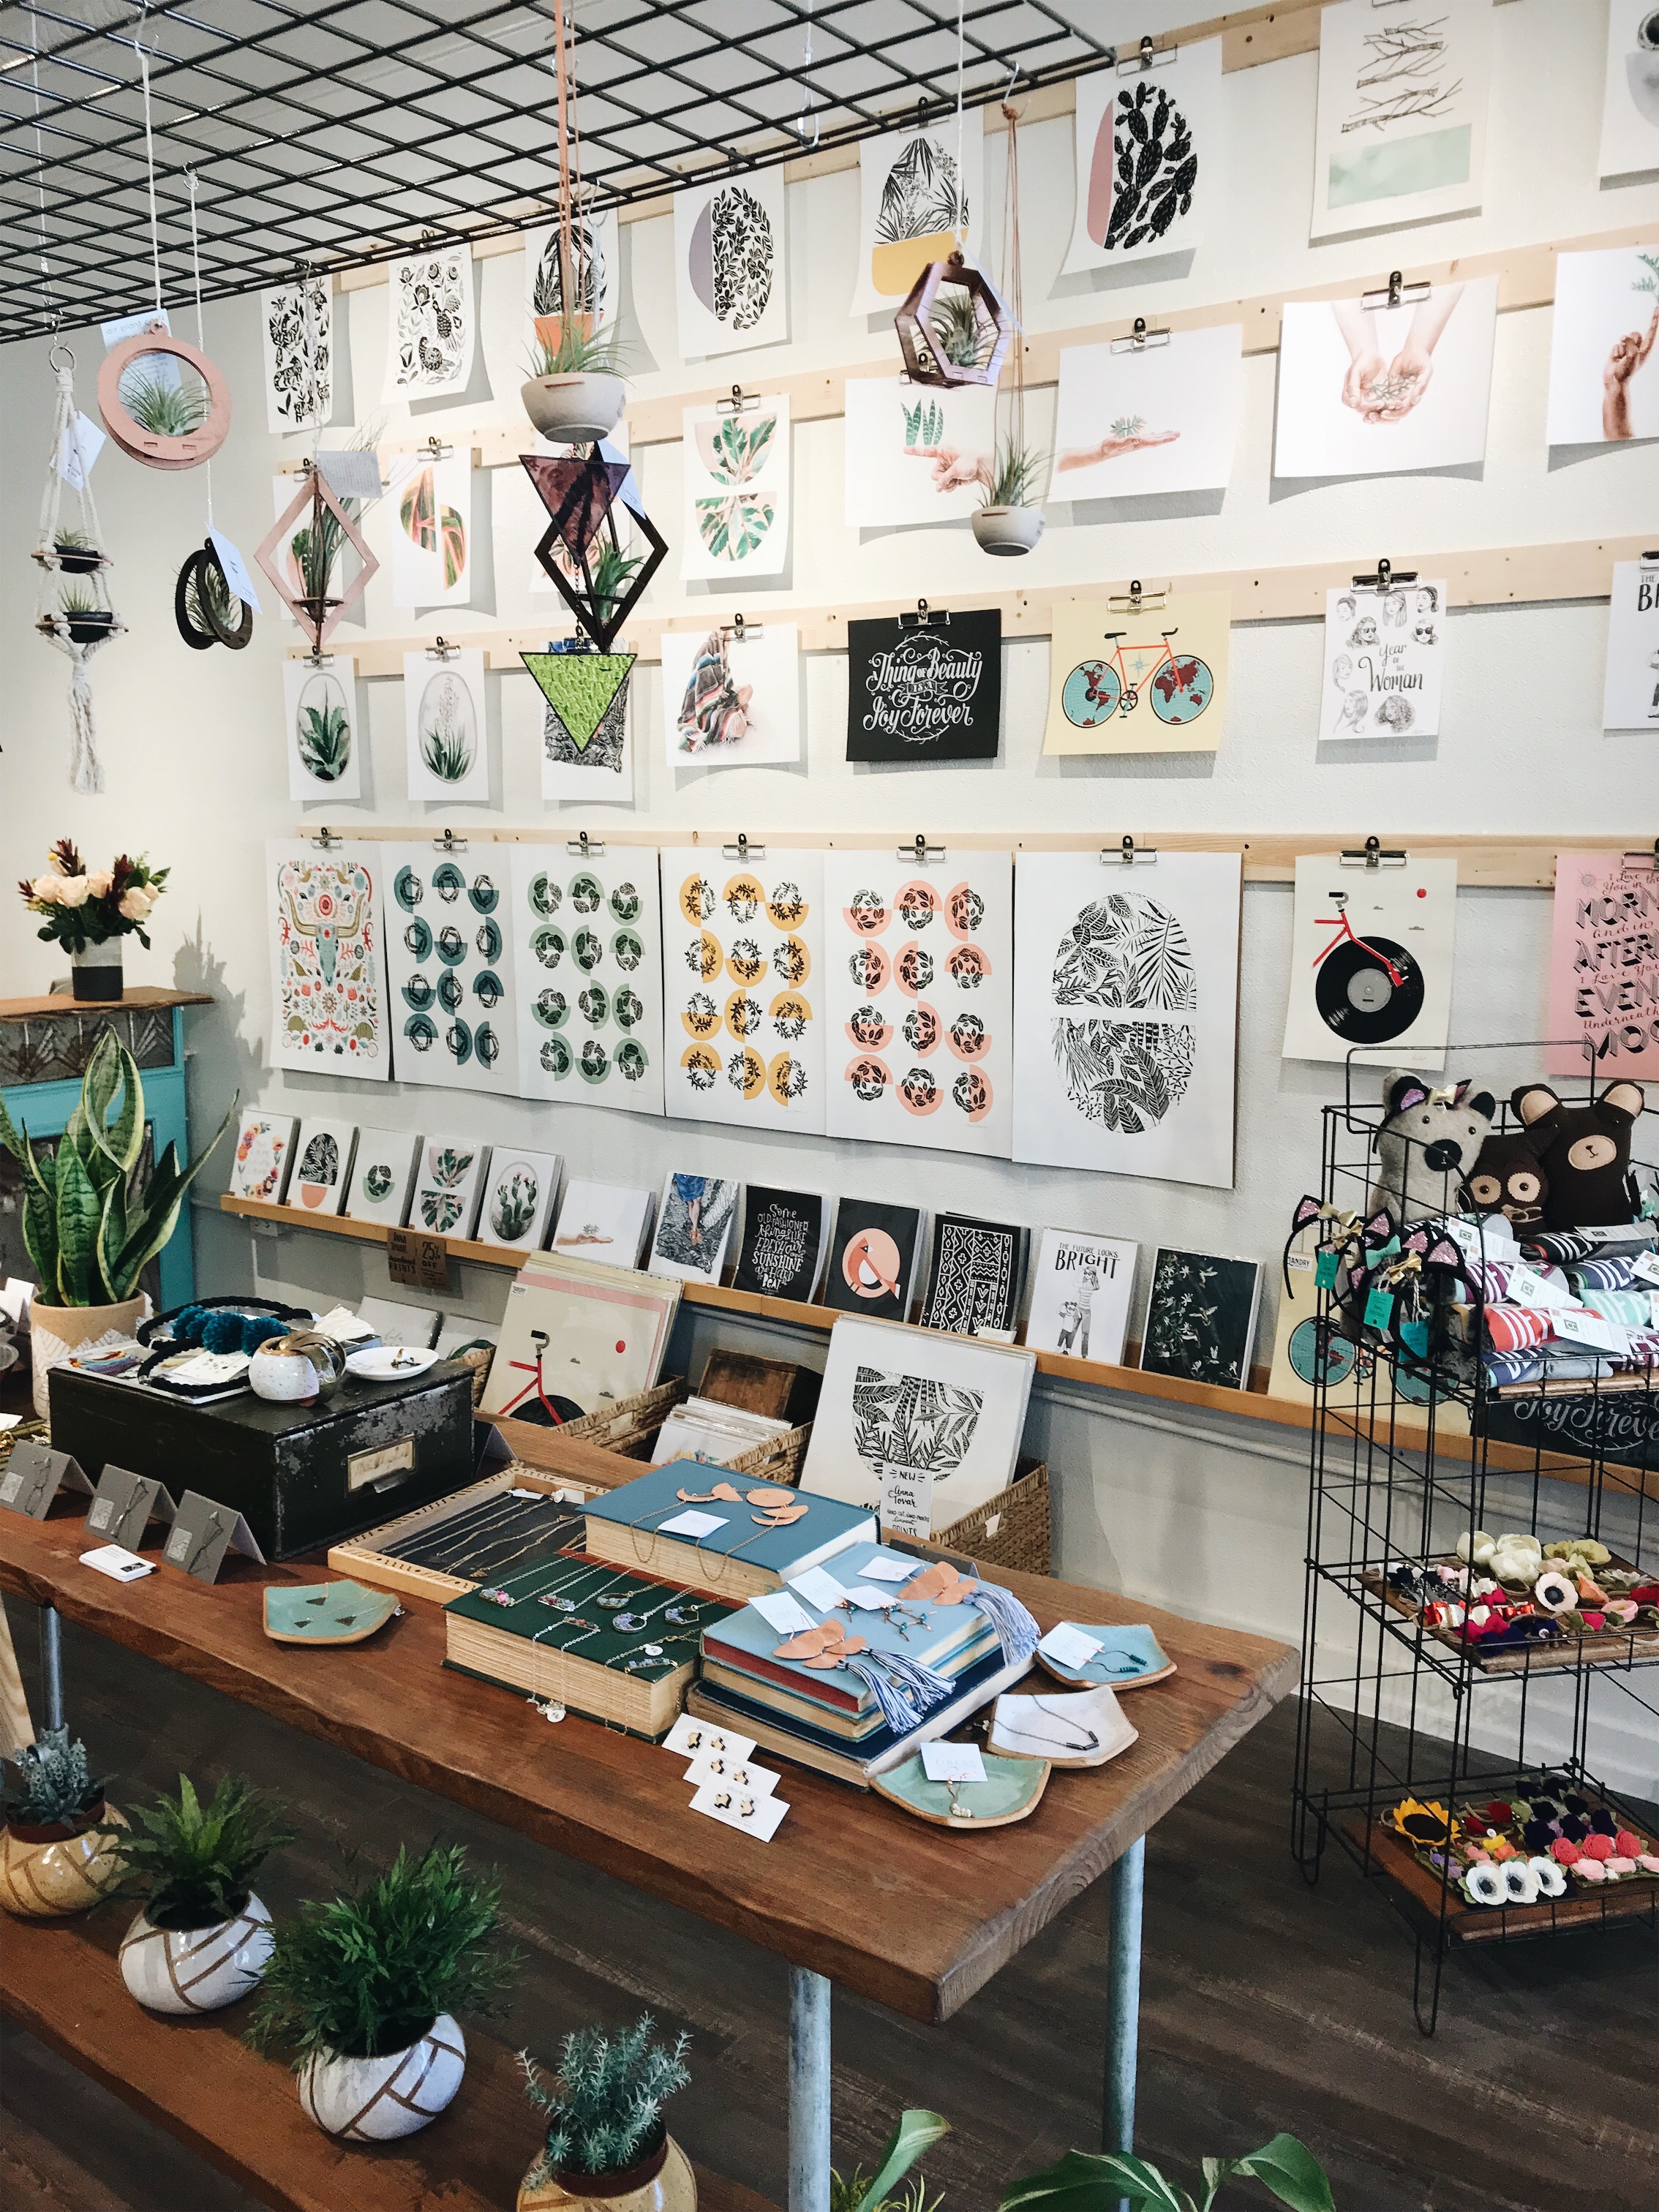 Handmade crafts on display at The DIME Store